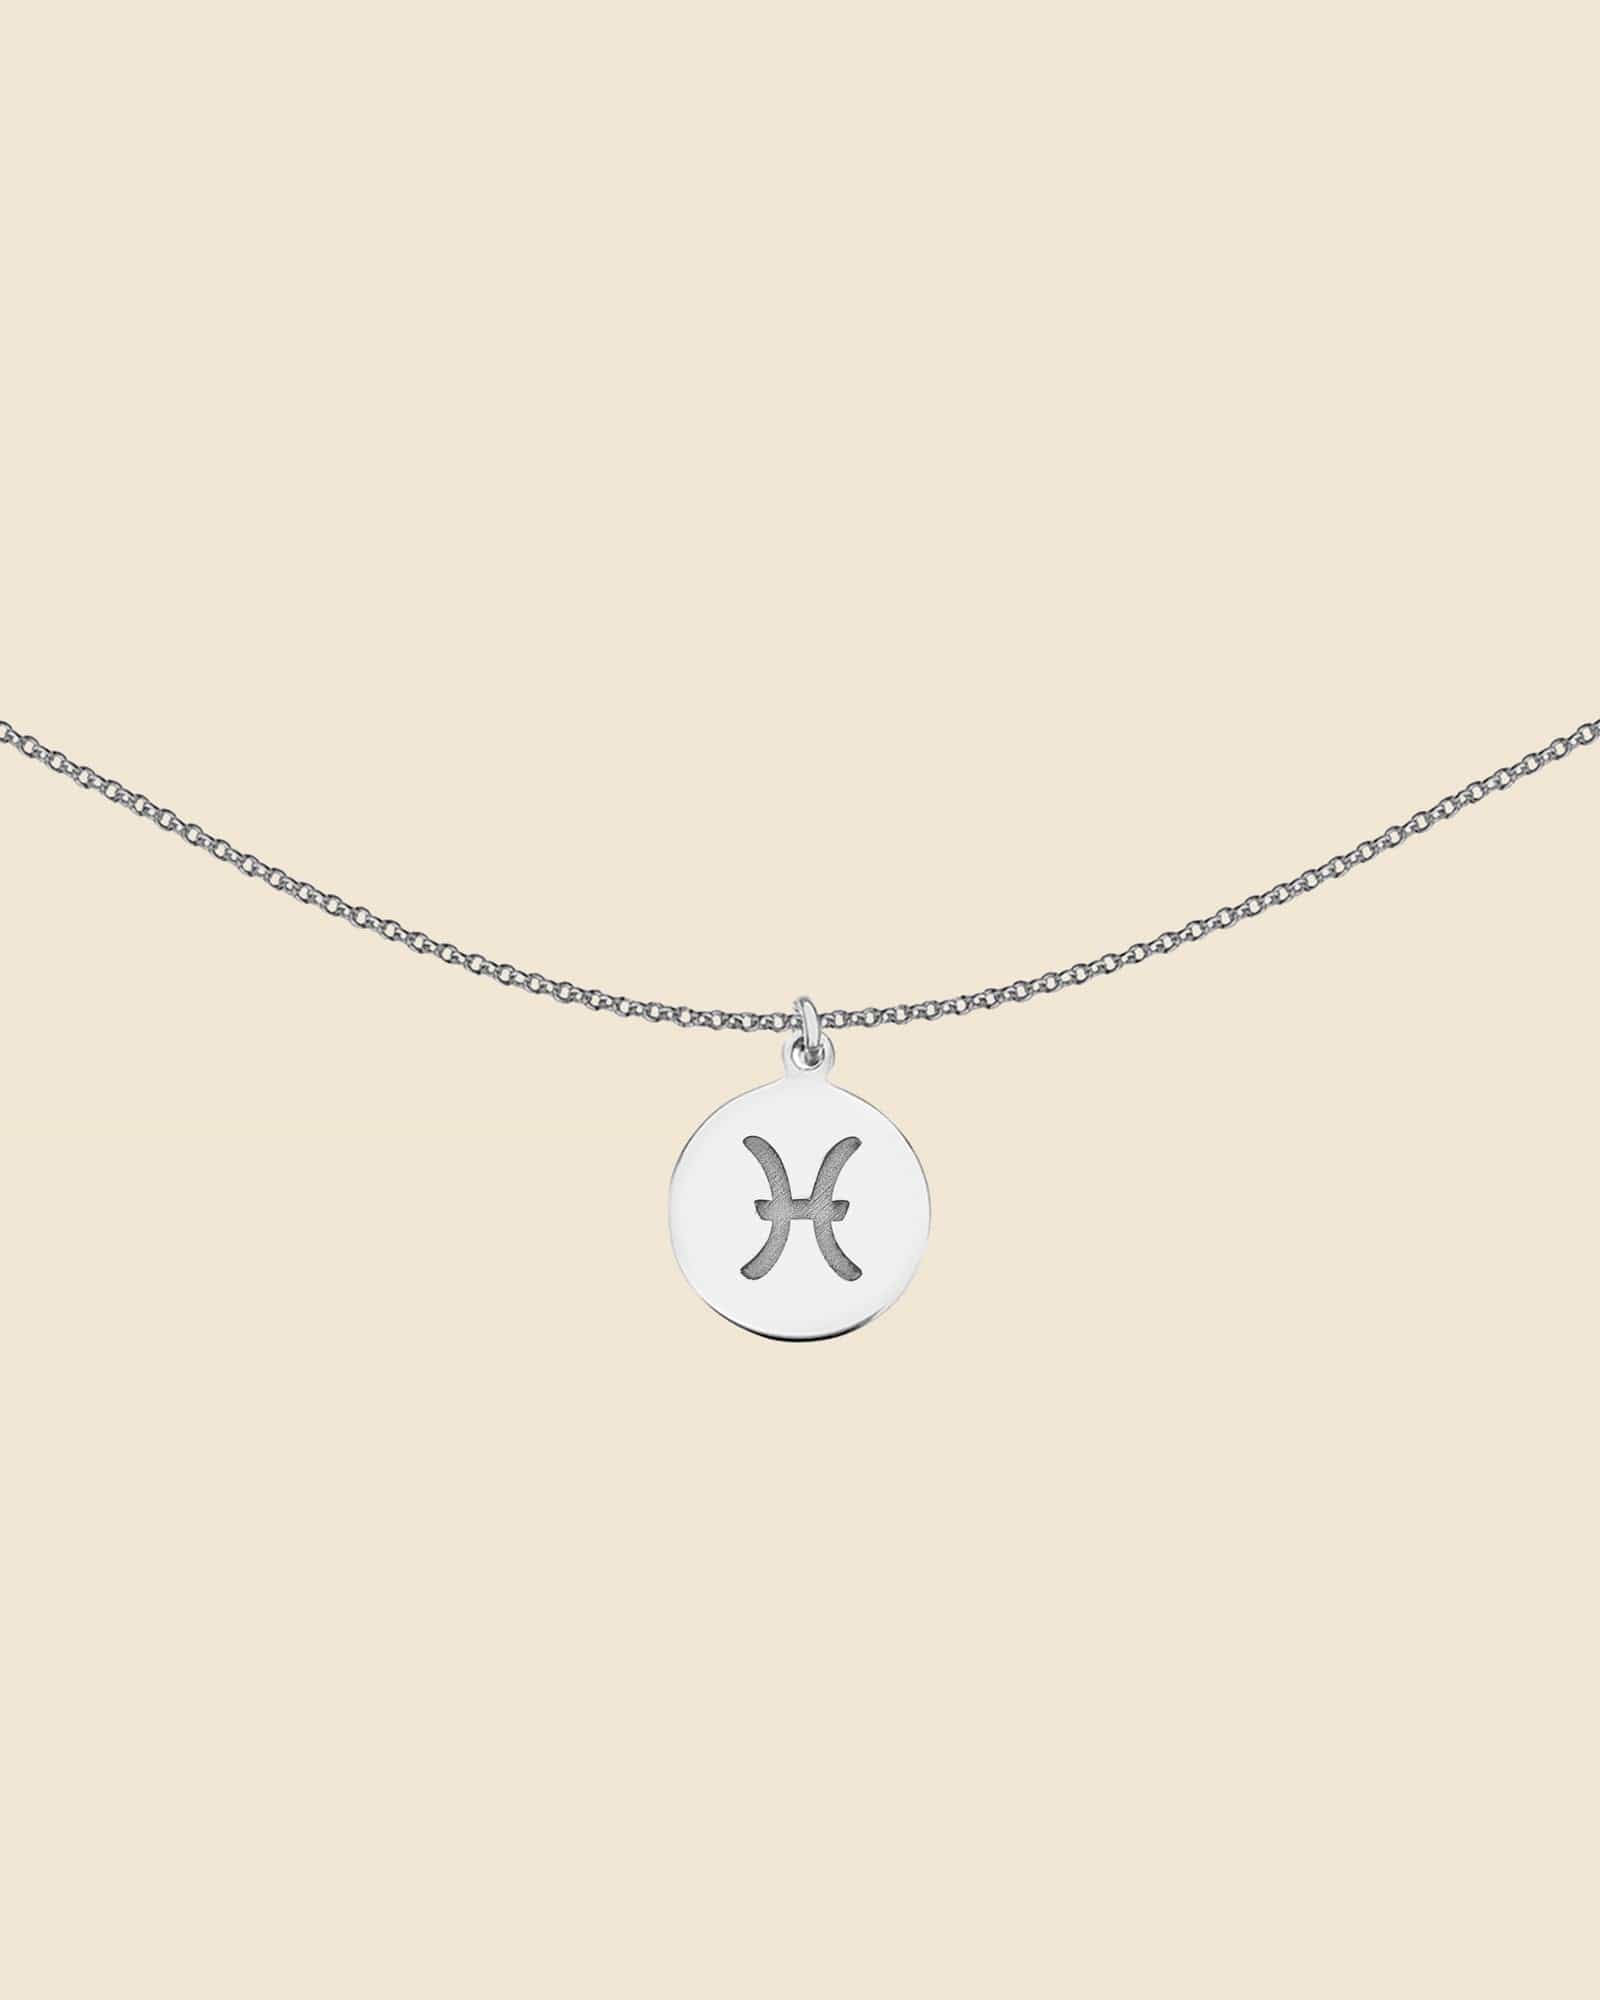 12 Constellation Cardboard Star Zodiac Sign Zodiac Pendant Necklace With  Gold And Silver Charm Featuring Aries, Cancer, Leo, And Scorpio Perfect  Jewelry Gift From Vivian5168, $0.58 | DHgate.Com